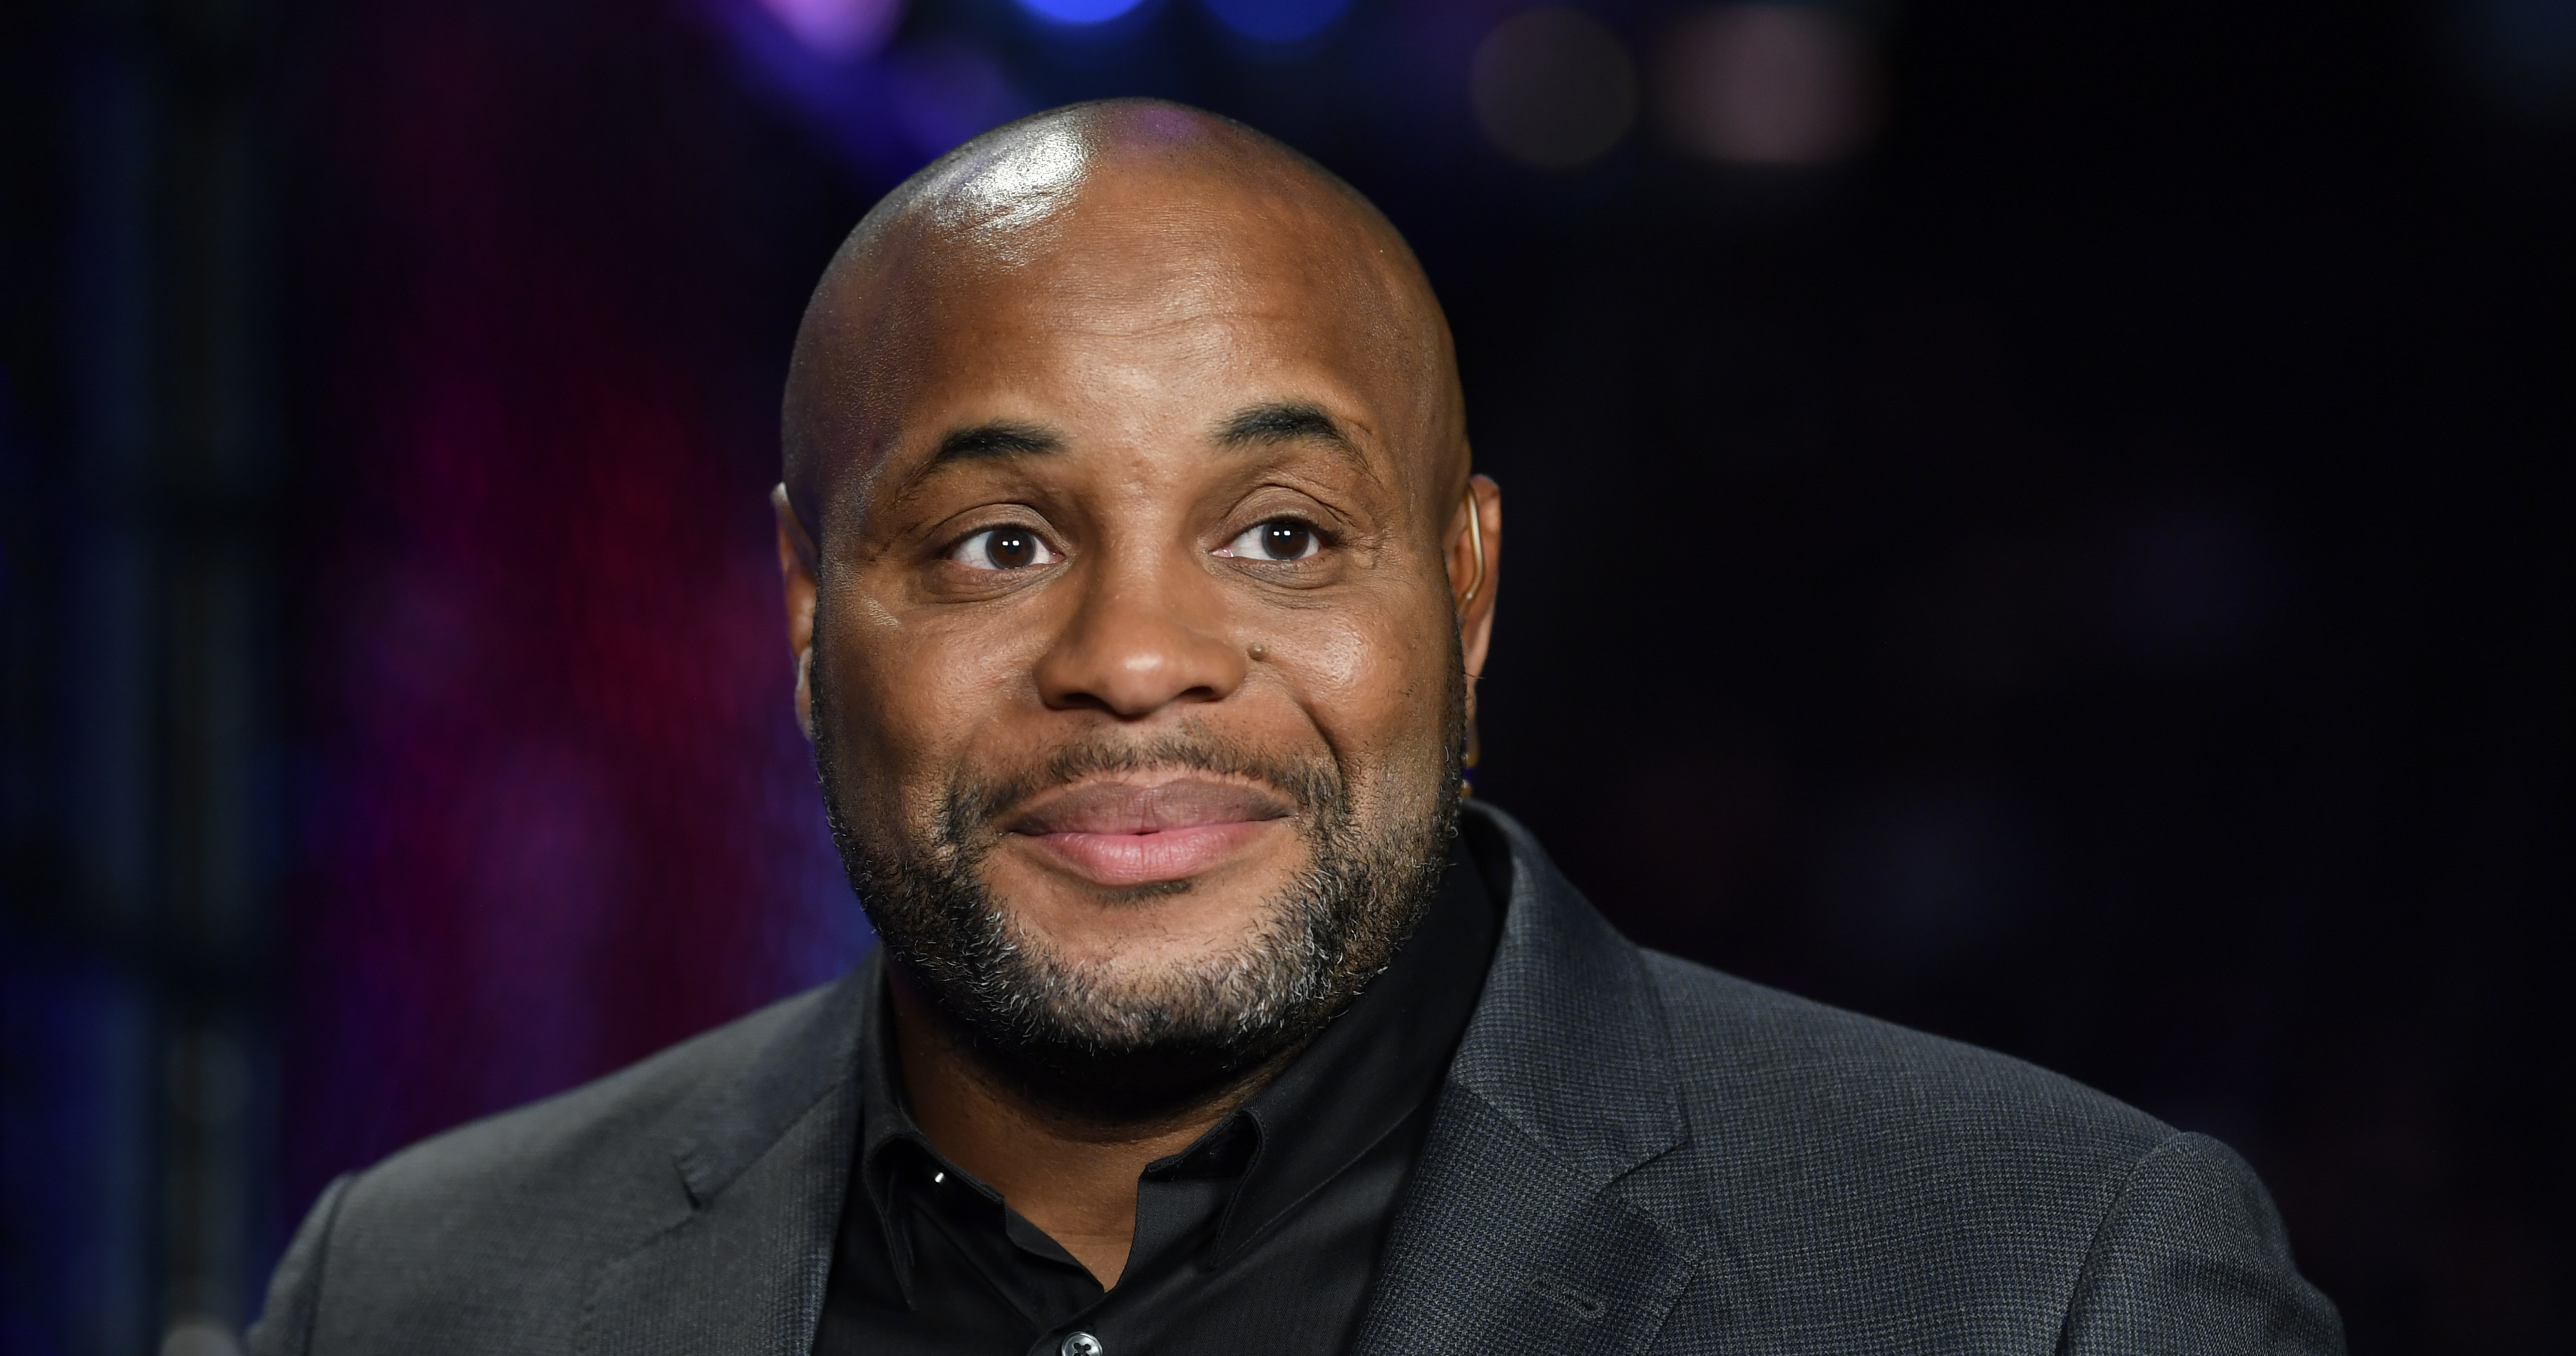 UFC Legend Daniel Cormier Reportedly to Be Inducted into 2022 Hall of